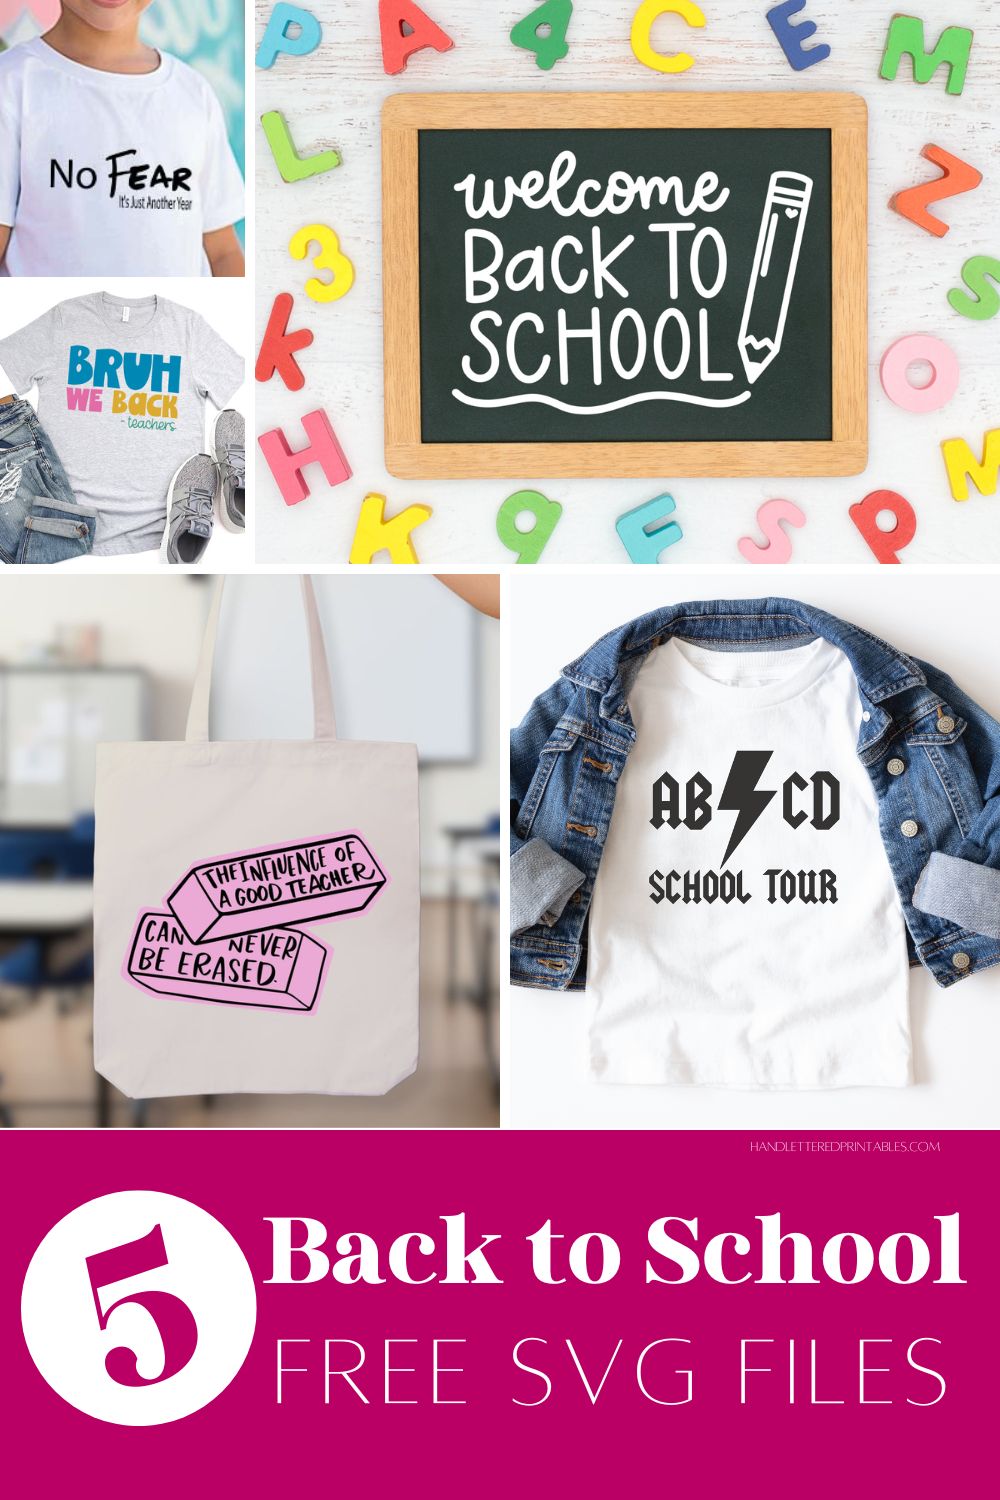 Image is a collage of DIY projects made with back to school themed SVG files, title text reads 5 back to school free SVG files